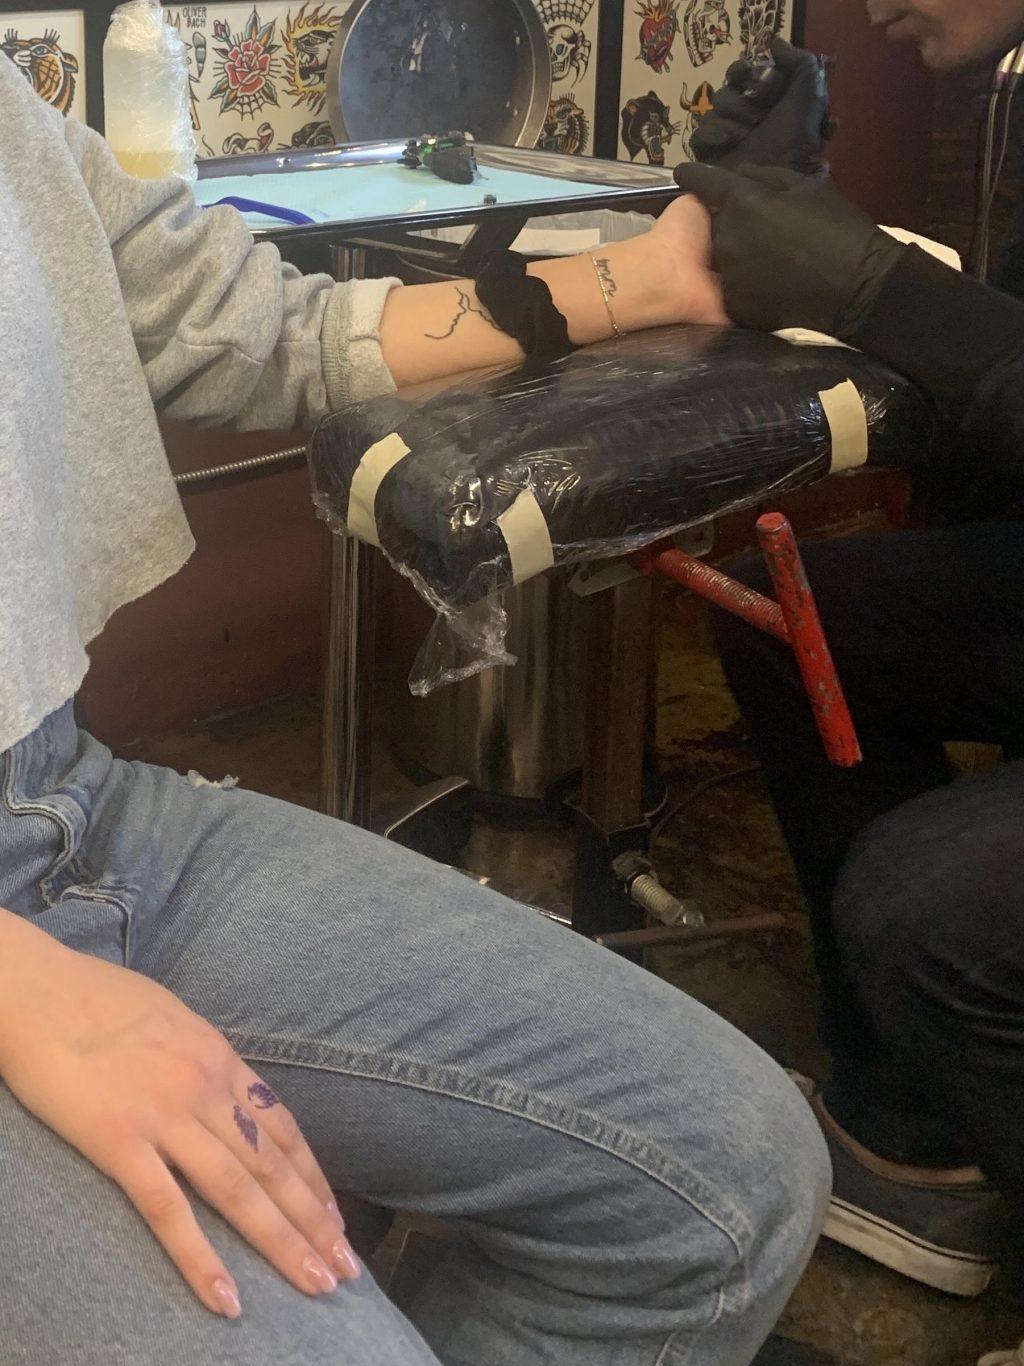 Moore sits for tattoos of angel wings and a little sparkle to be tattooed on her fingers at a shop in Los Angeles in January 2020. Moore said tattoos in LA are some of the most expensive, where minimum payments could range from $80 to $90. Photo courtesy of Marissa Moore